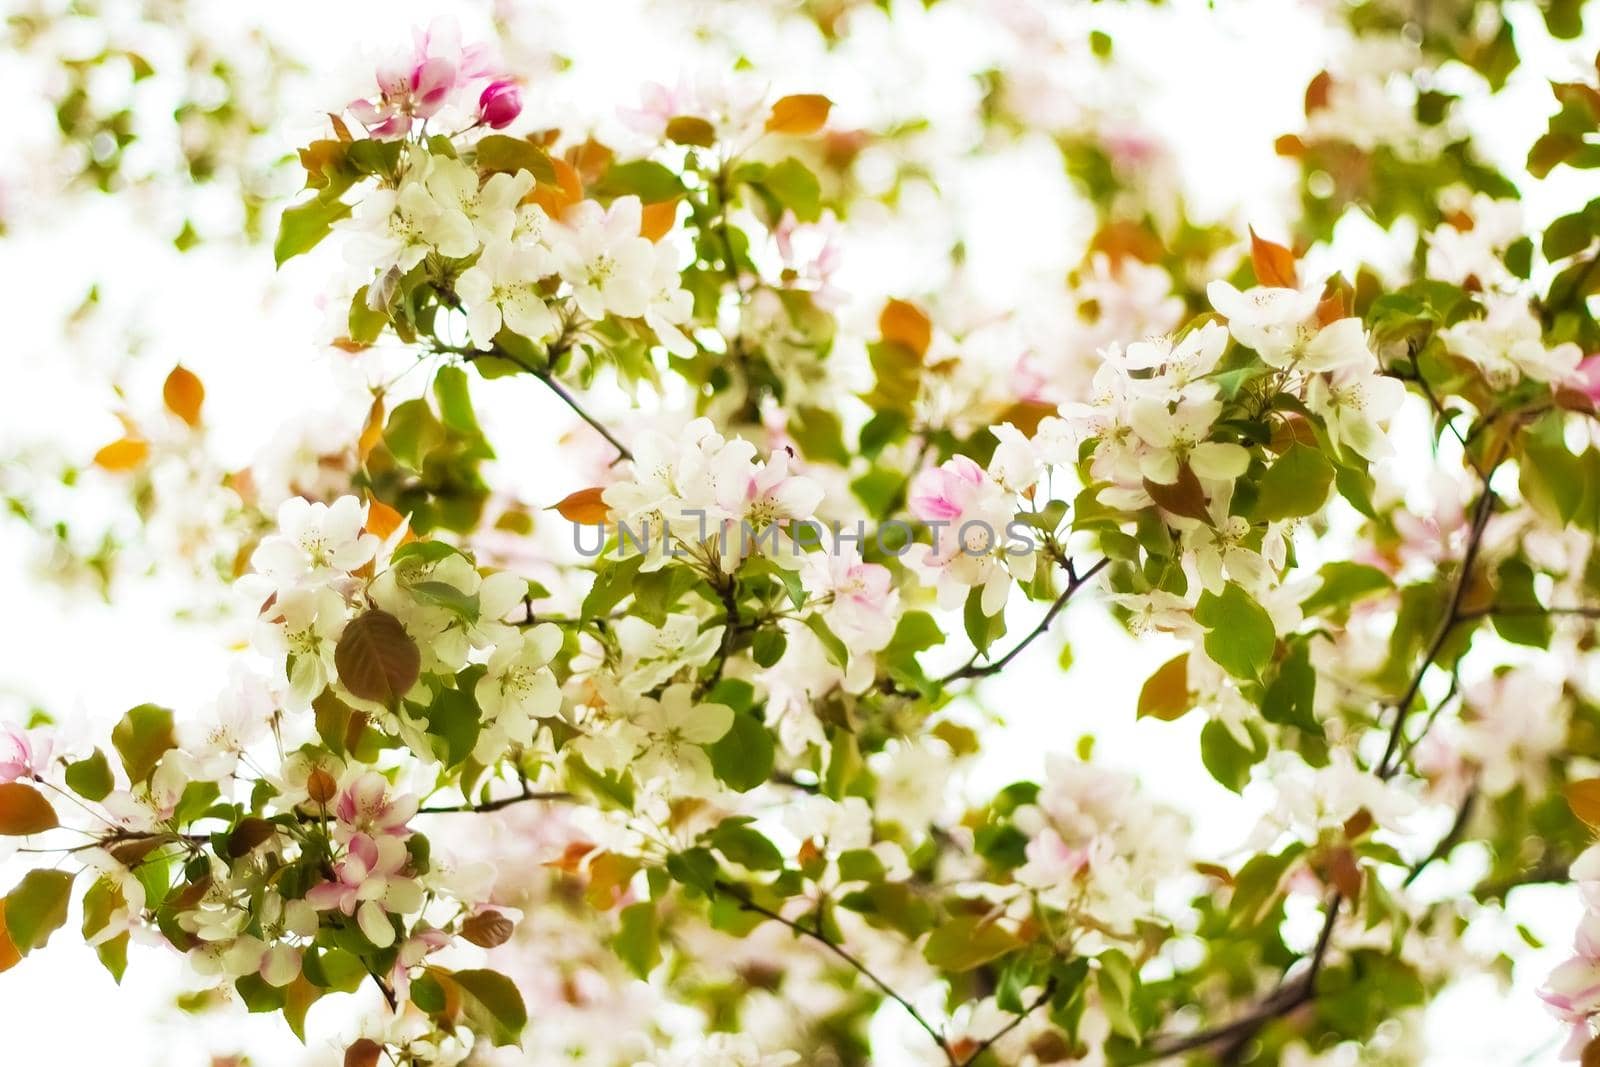 Branch of a blossoming decorative apple tree with buds and flowers, focus on the foreground, blurred background, selective focus.